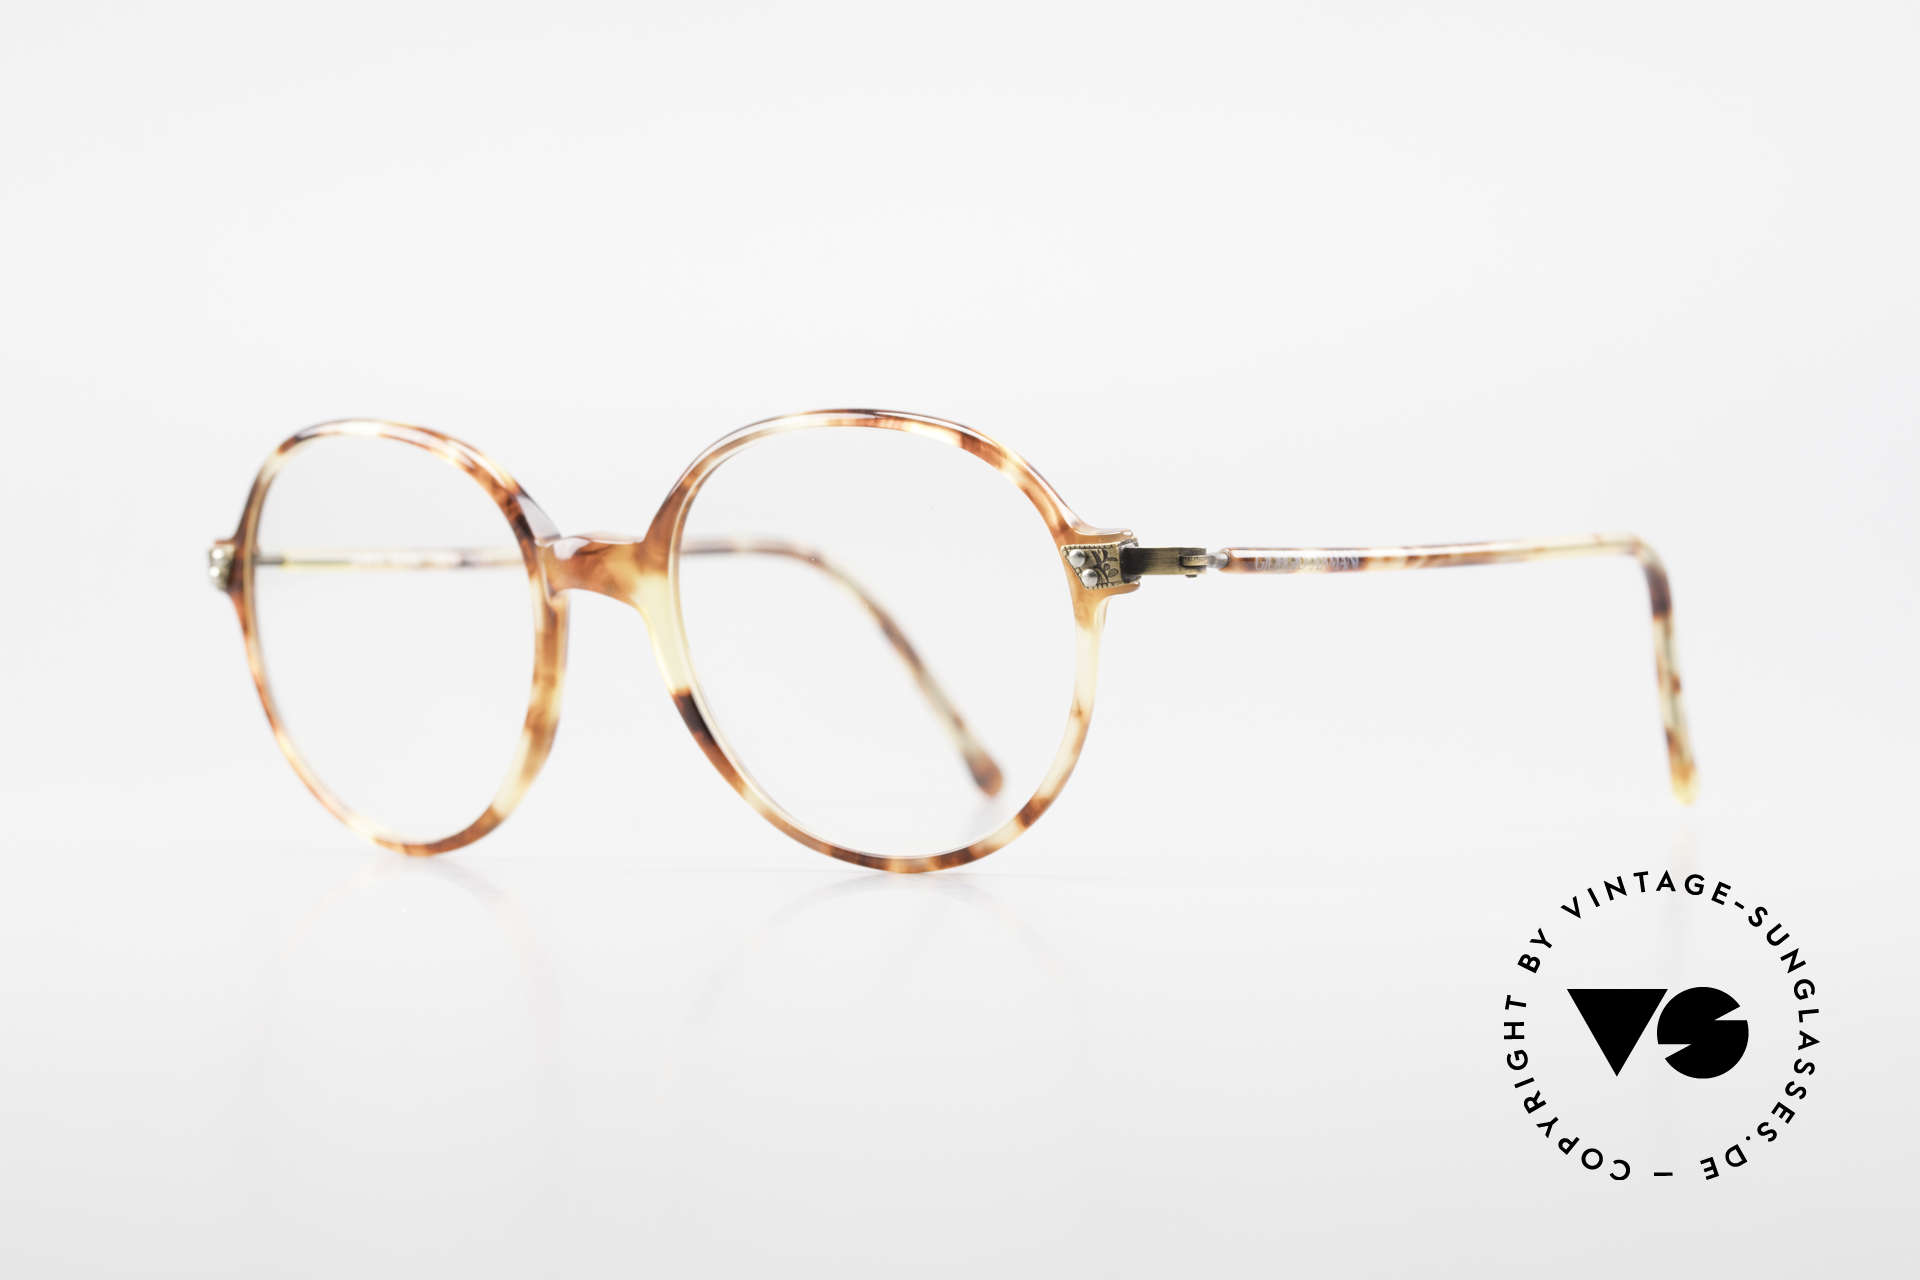 Giorgio Armani 334 Vintage Round Eyeglass-Frame, very elegant tortoise frame texture with brass hinges, Made for Men and Women